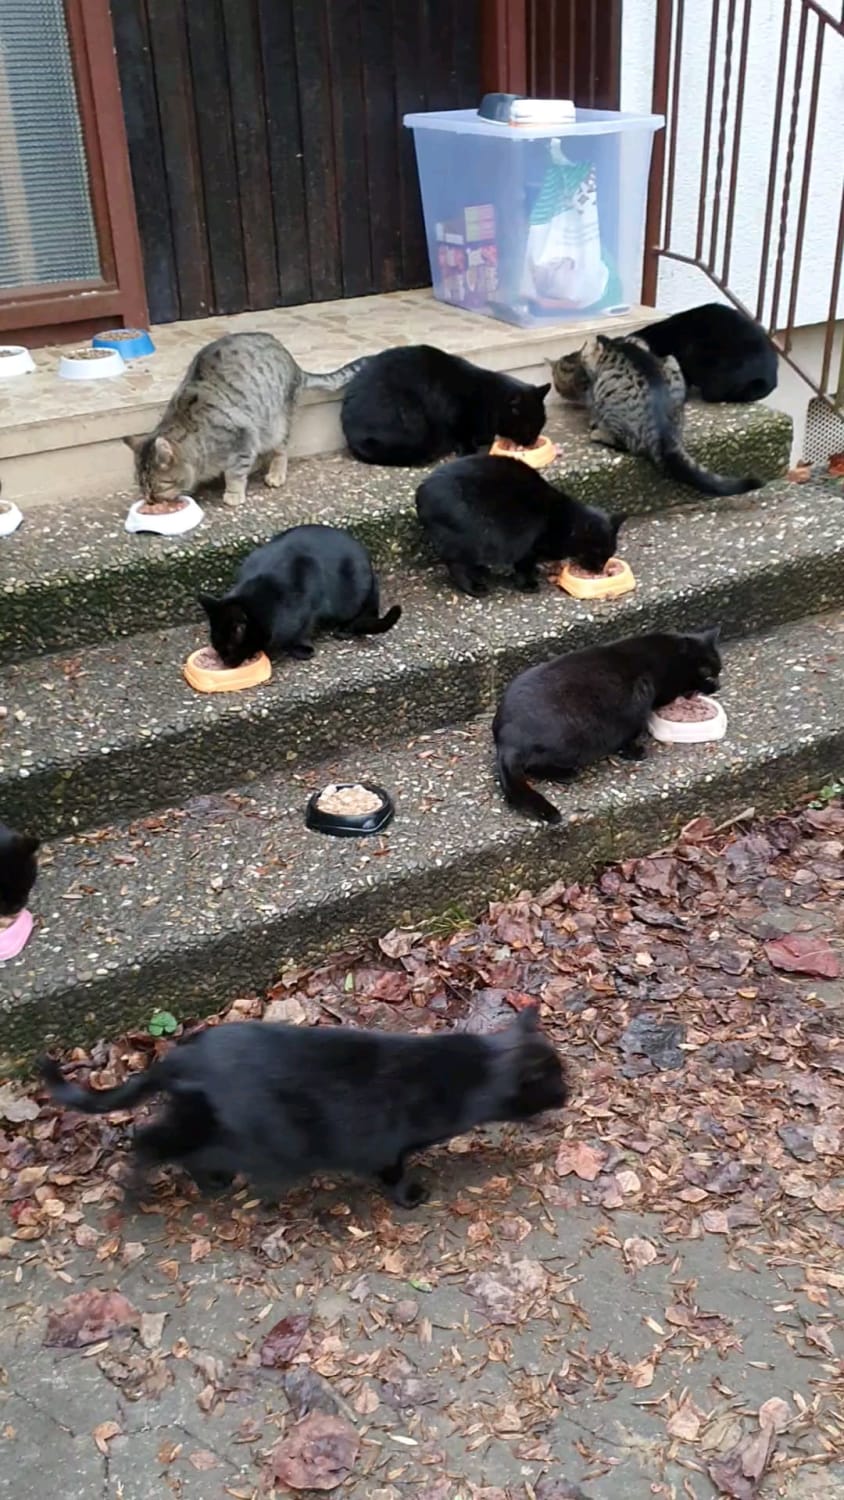 Merry Christmas to all you cat lovers! Feeding some stray cats in the neighbourhood